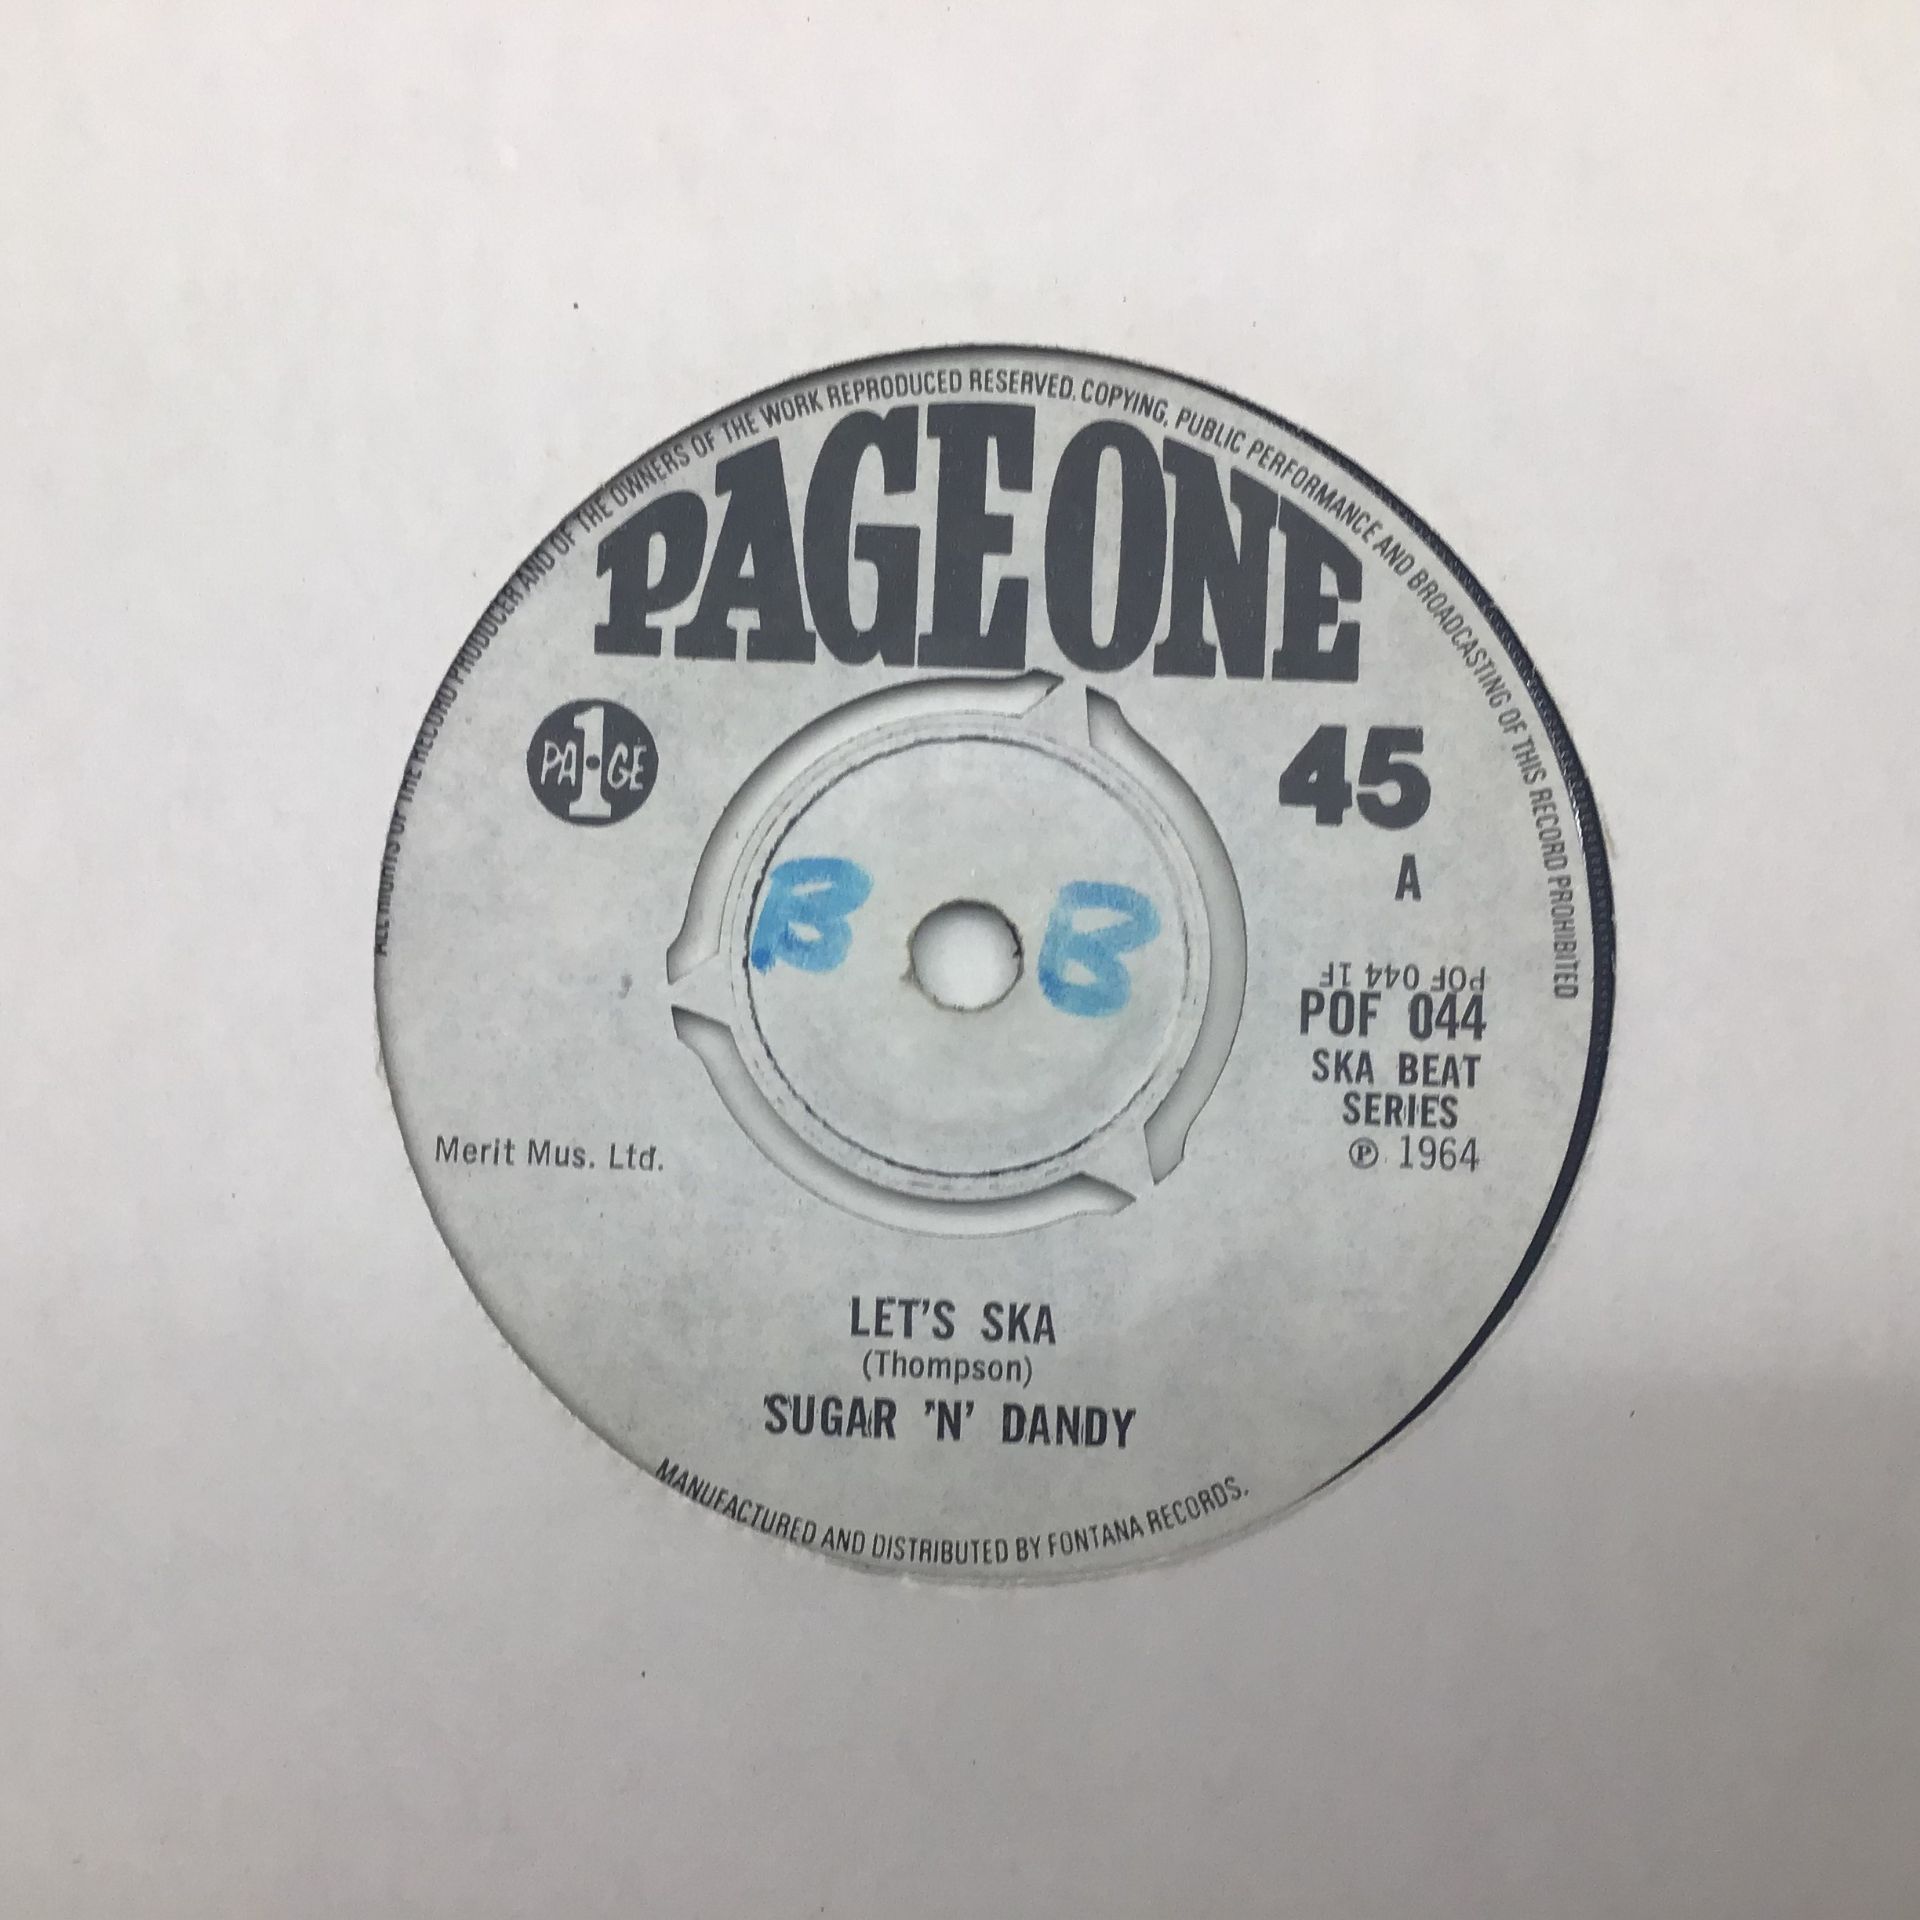 SCARCE 7” SUGAR ‘N’ DANDY - ‘LET’S SKA’. Great ska single here from 1964 on Page One records POF 044